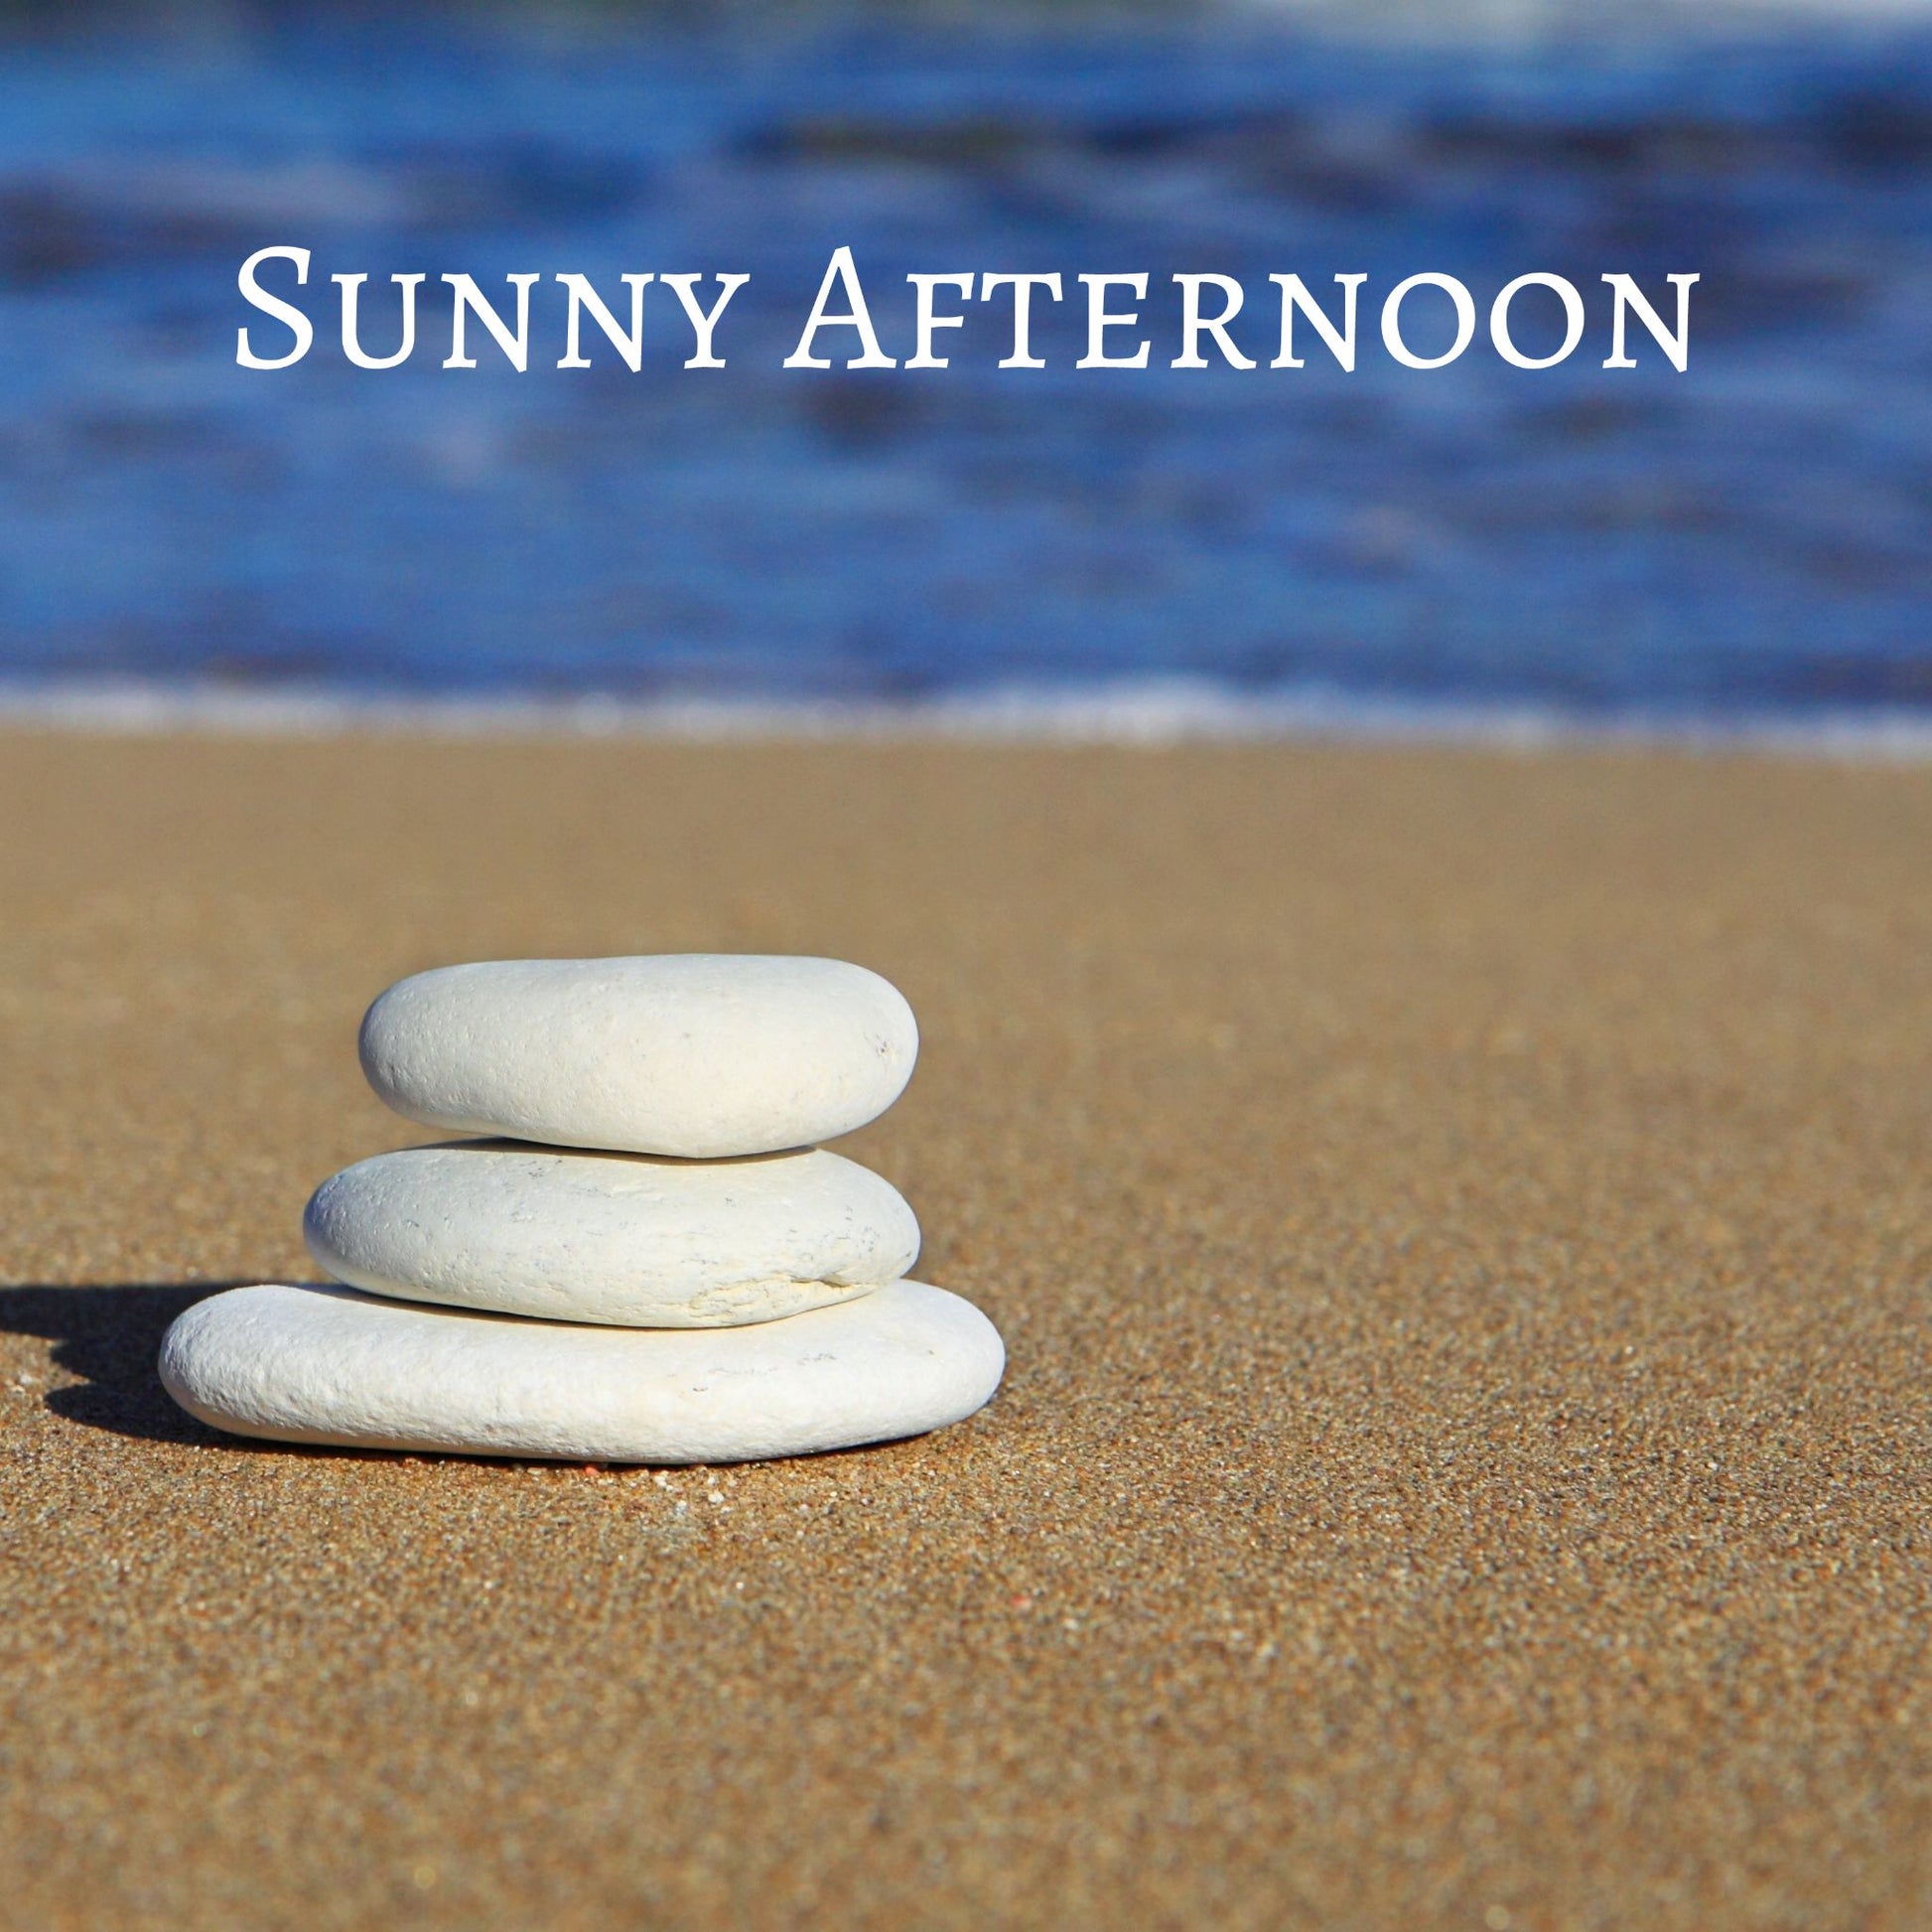 CD Cover of song Sunny Afternoon